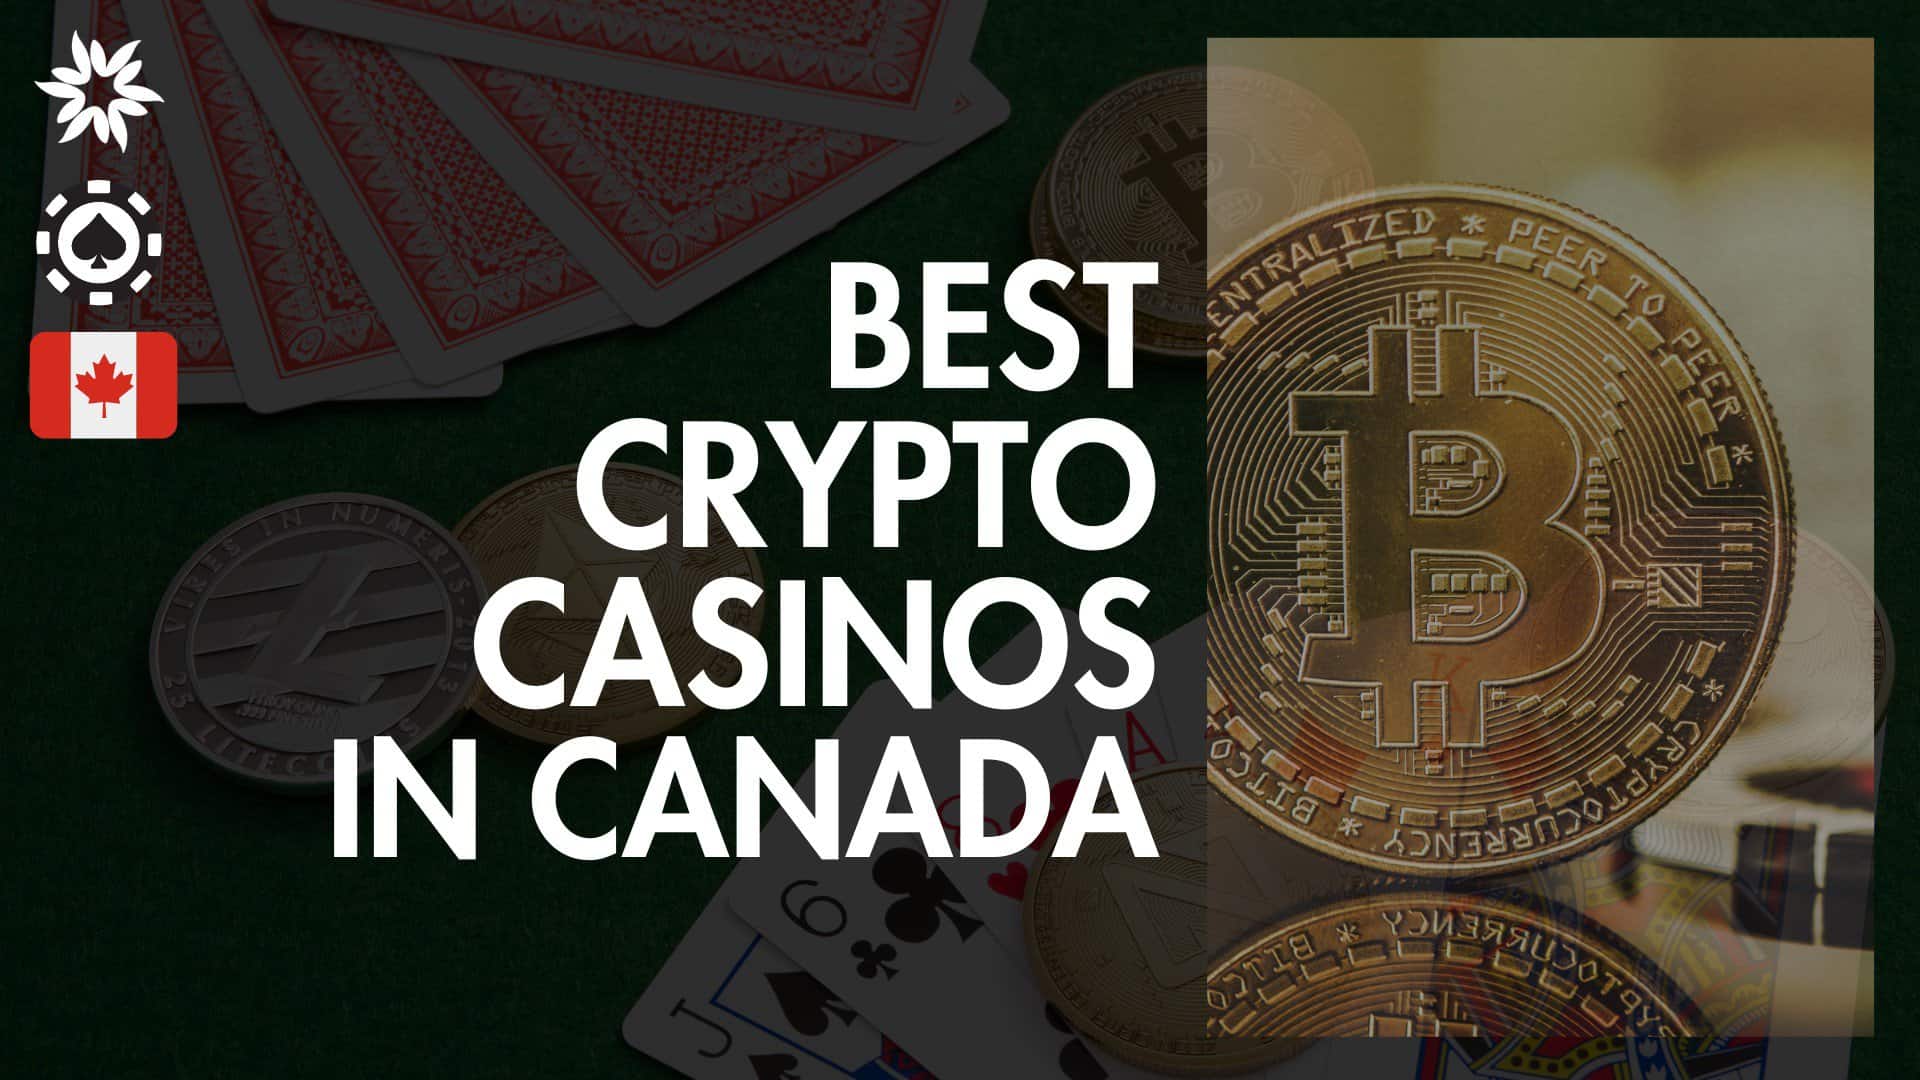 best-crypto-casinos-in-canada-for-current-date-formatf-y-top-10-canadian-bitcoin-casino-sites-for-big-payouts